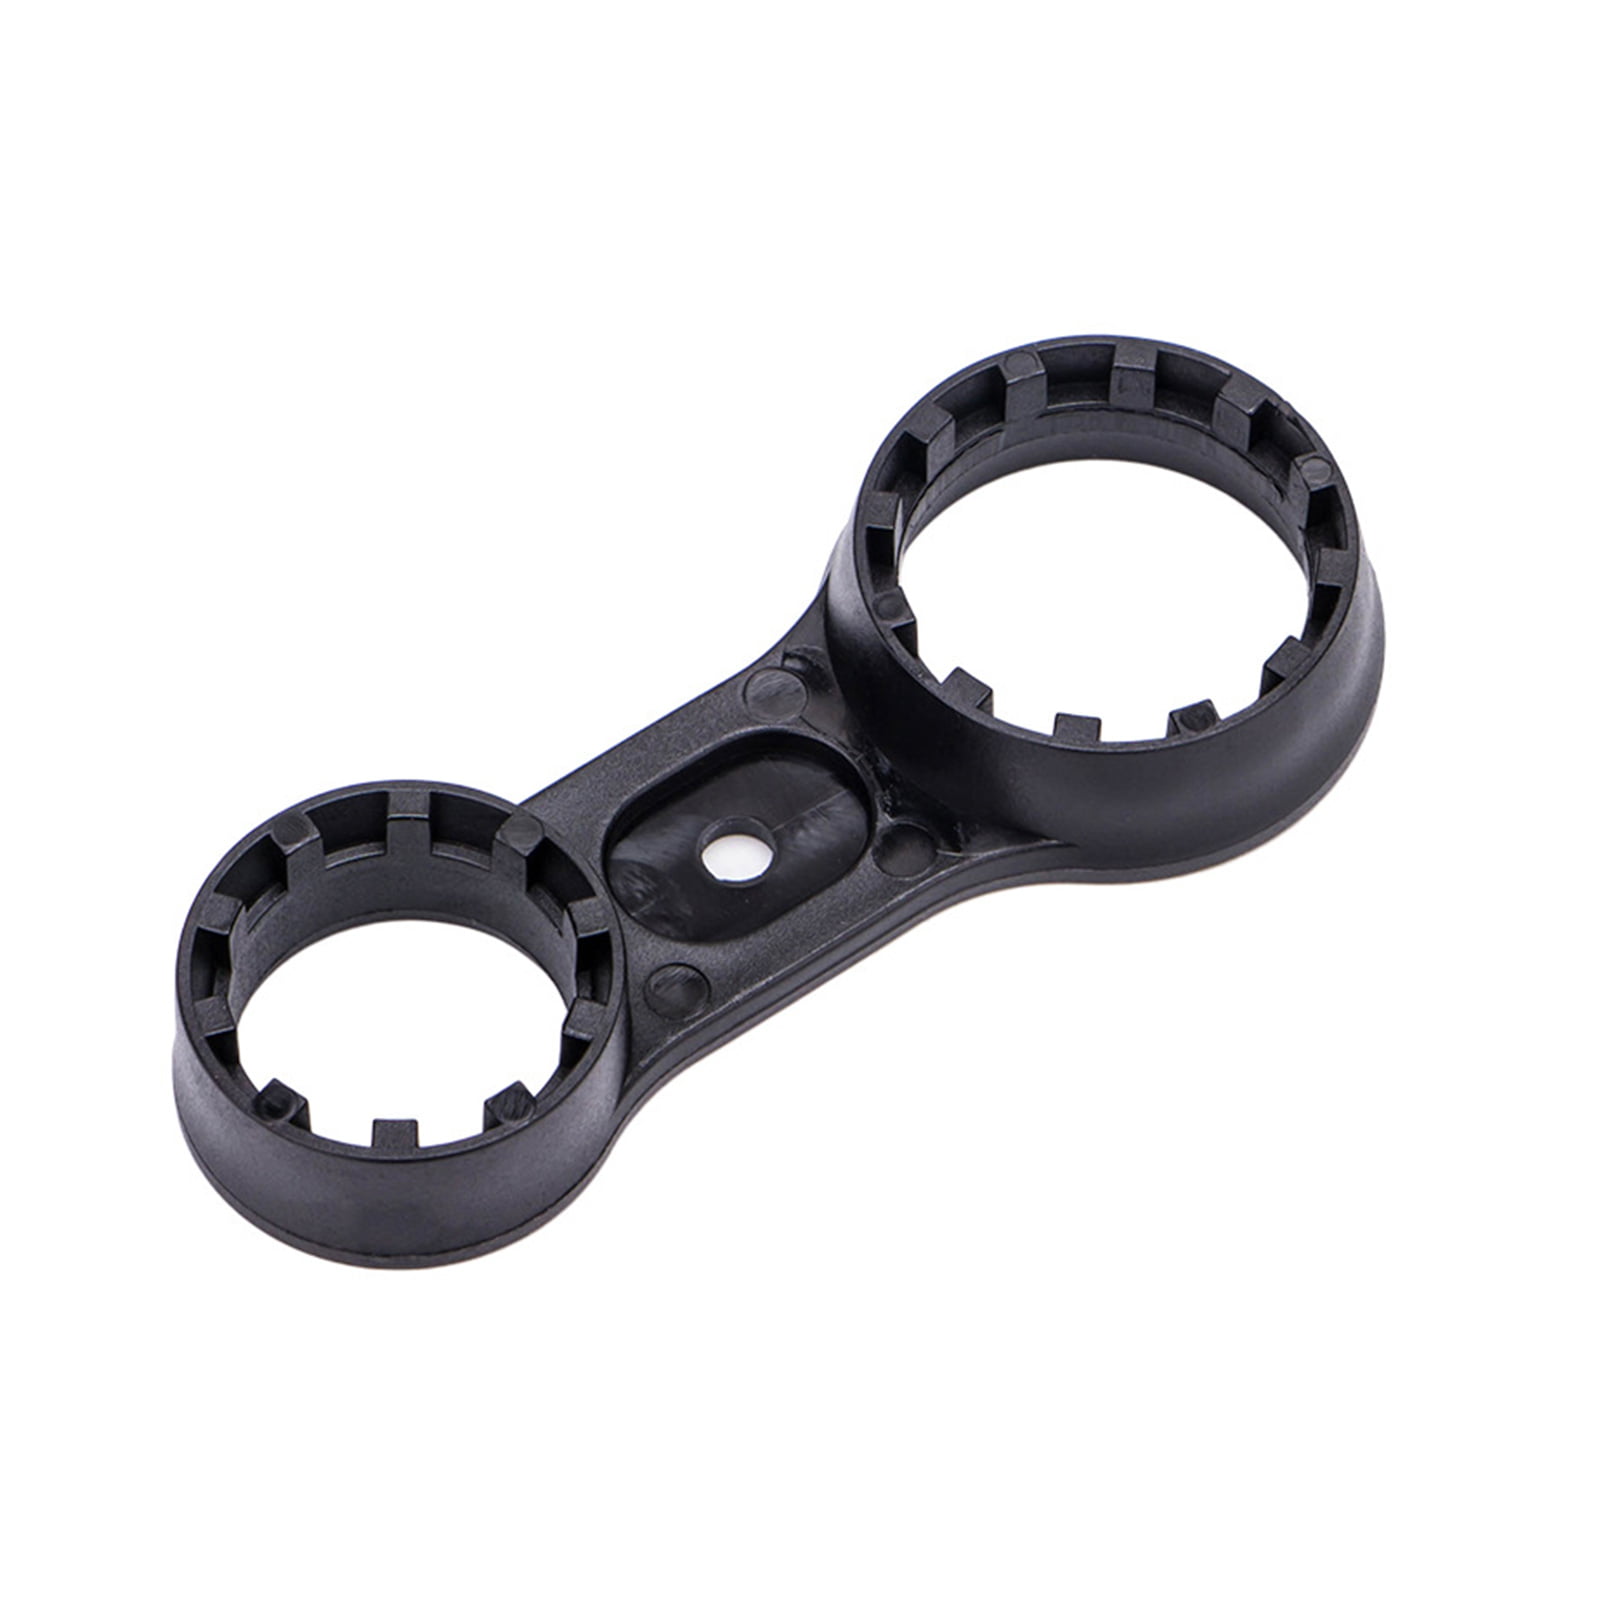 Details about   Bicycle Front Fork Cover Wrench Spanner Remove Tool for SUNTOUR XCR/RST/XCM 